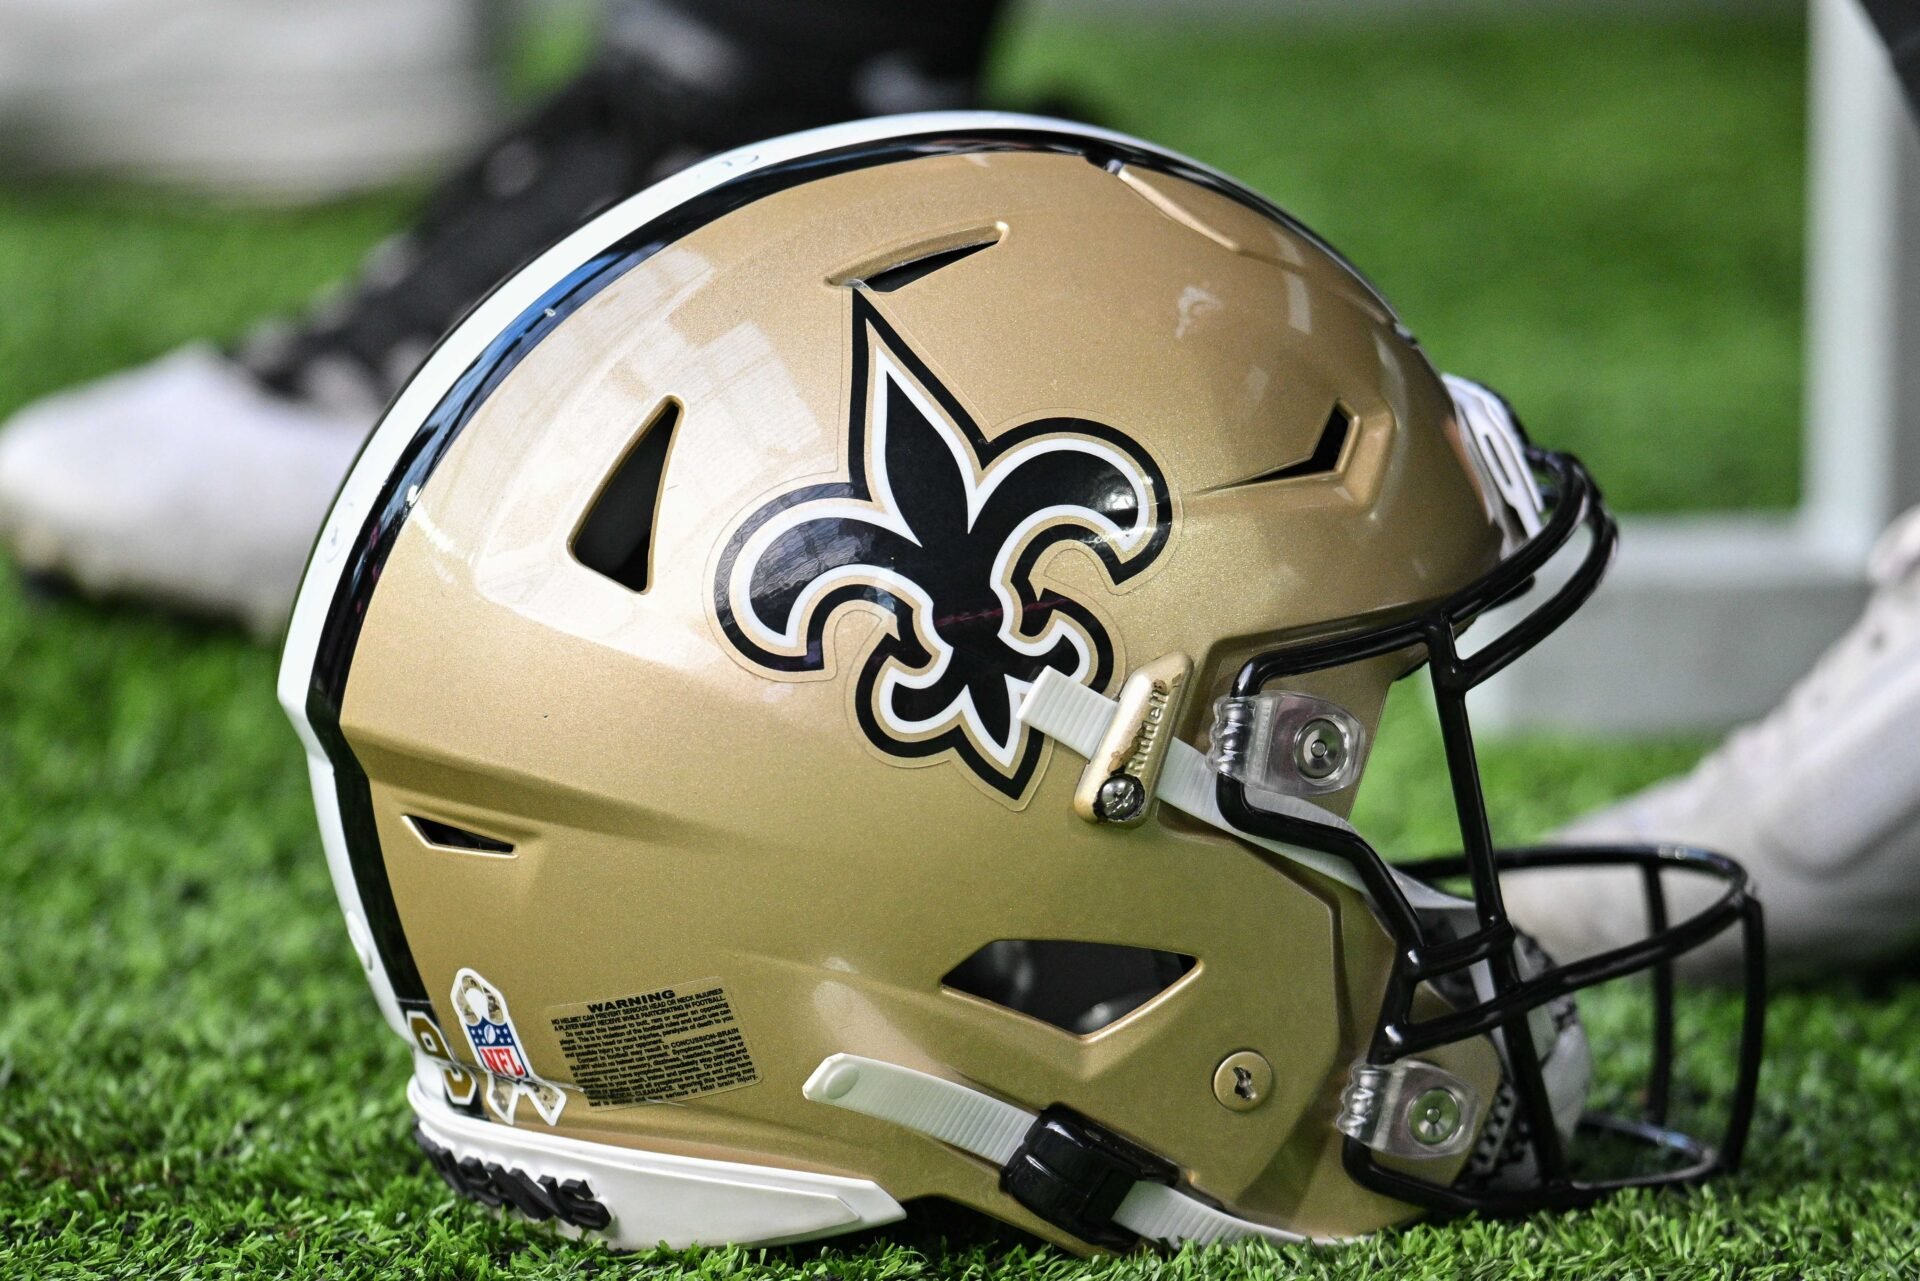 A New Orleans Saints helmet during the game between the Minnesota Vikings and the New Orleans Saints at U.S. Bank Stadium.